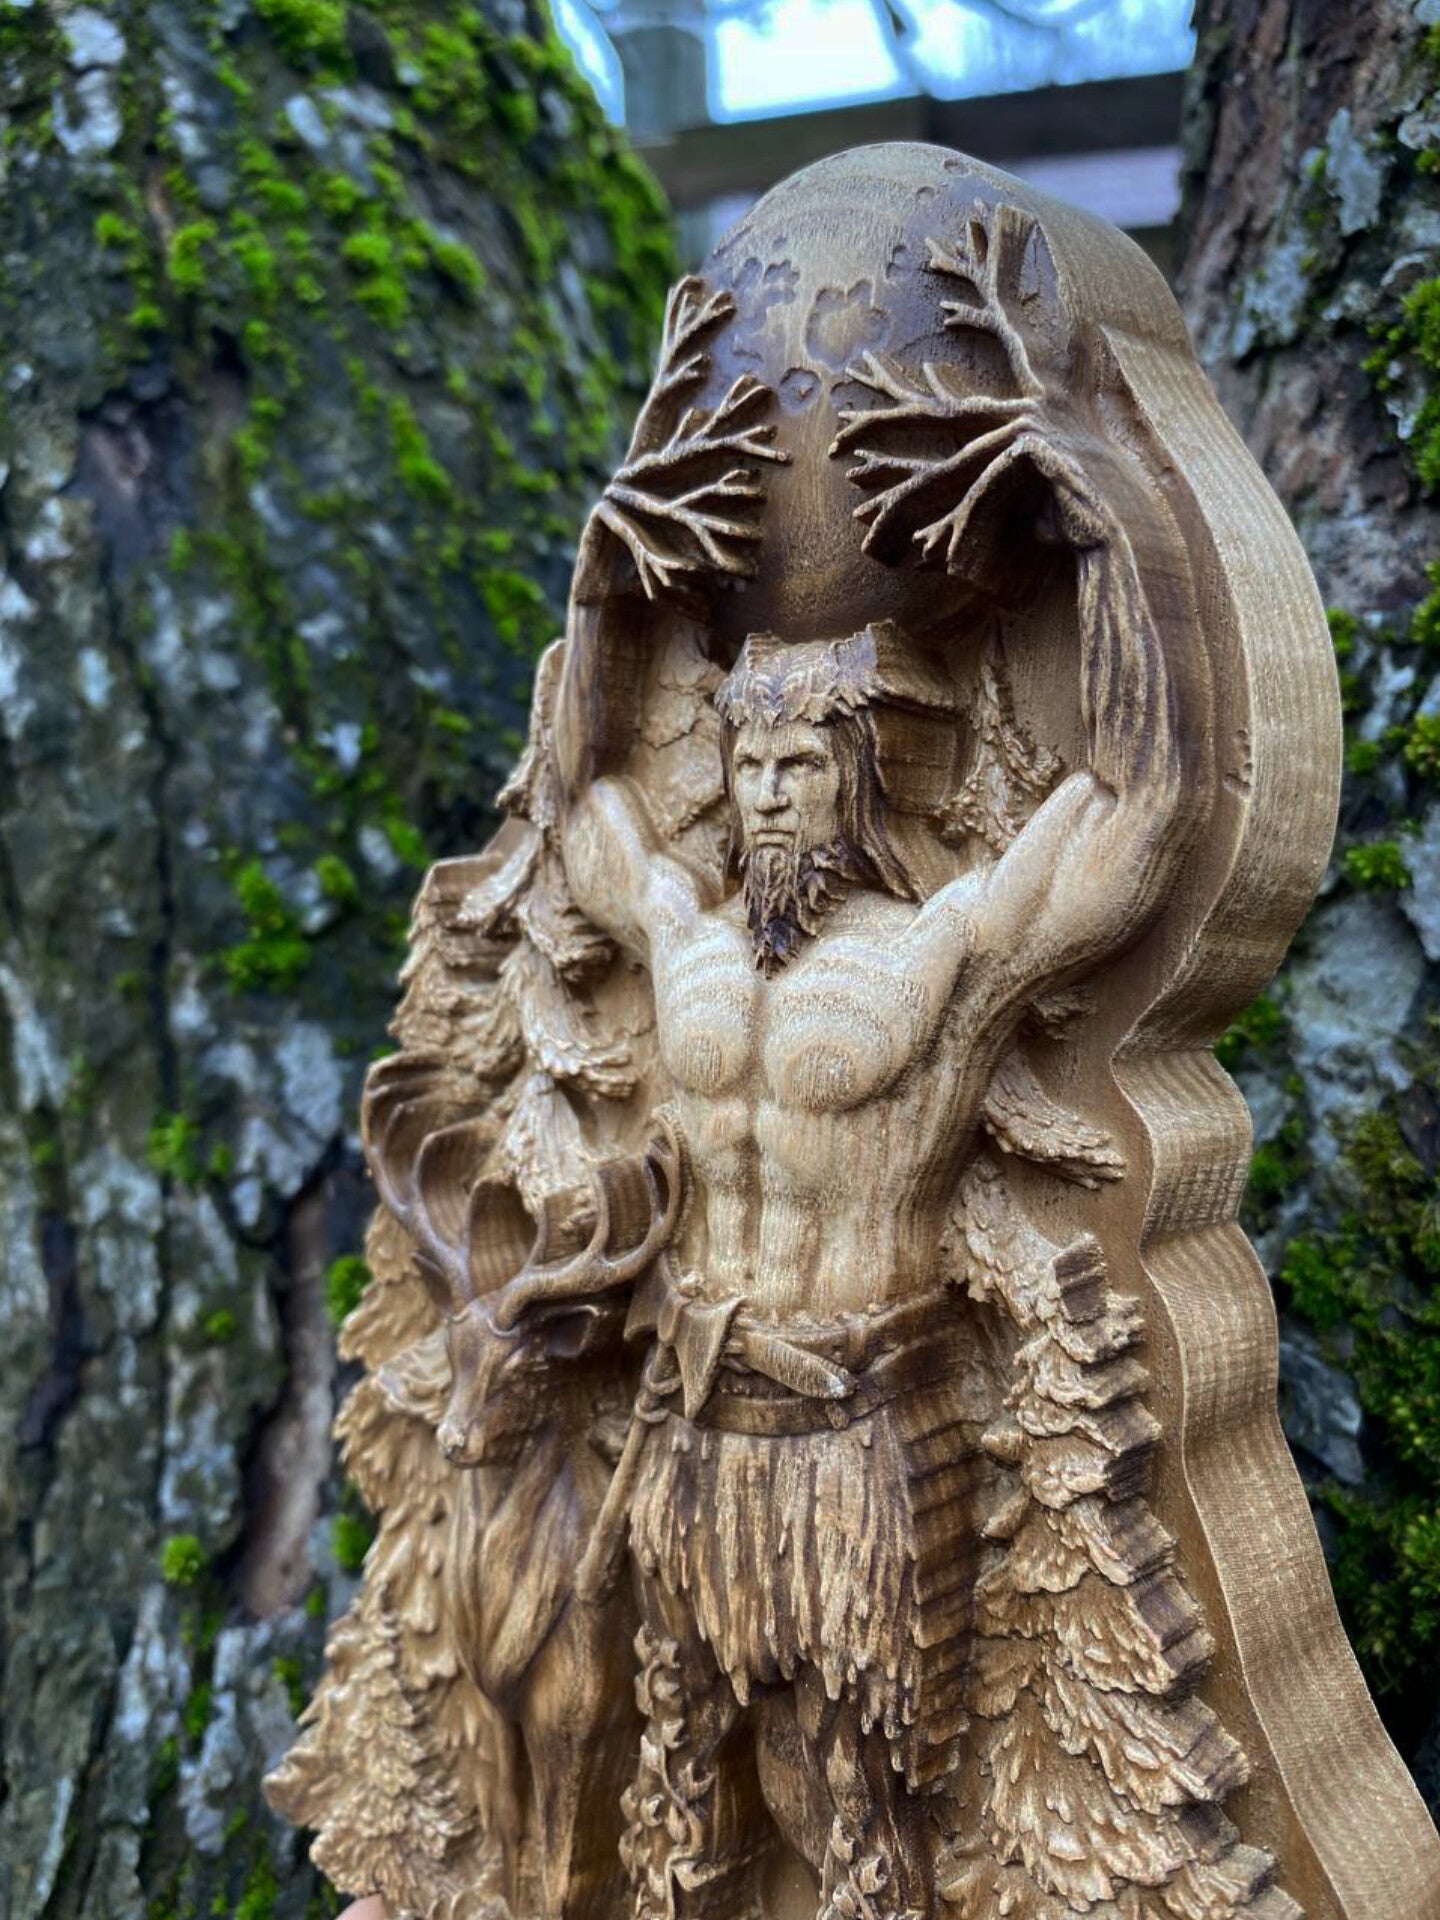 Tapio, Horned god, Lord of the forest, Norse mythology Wood carving